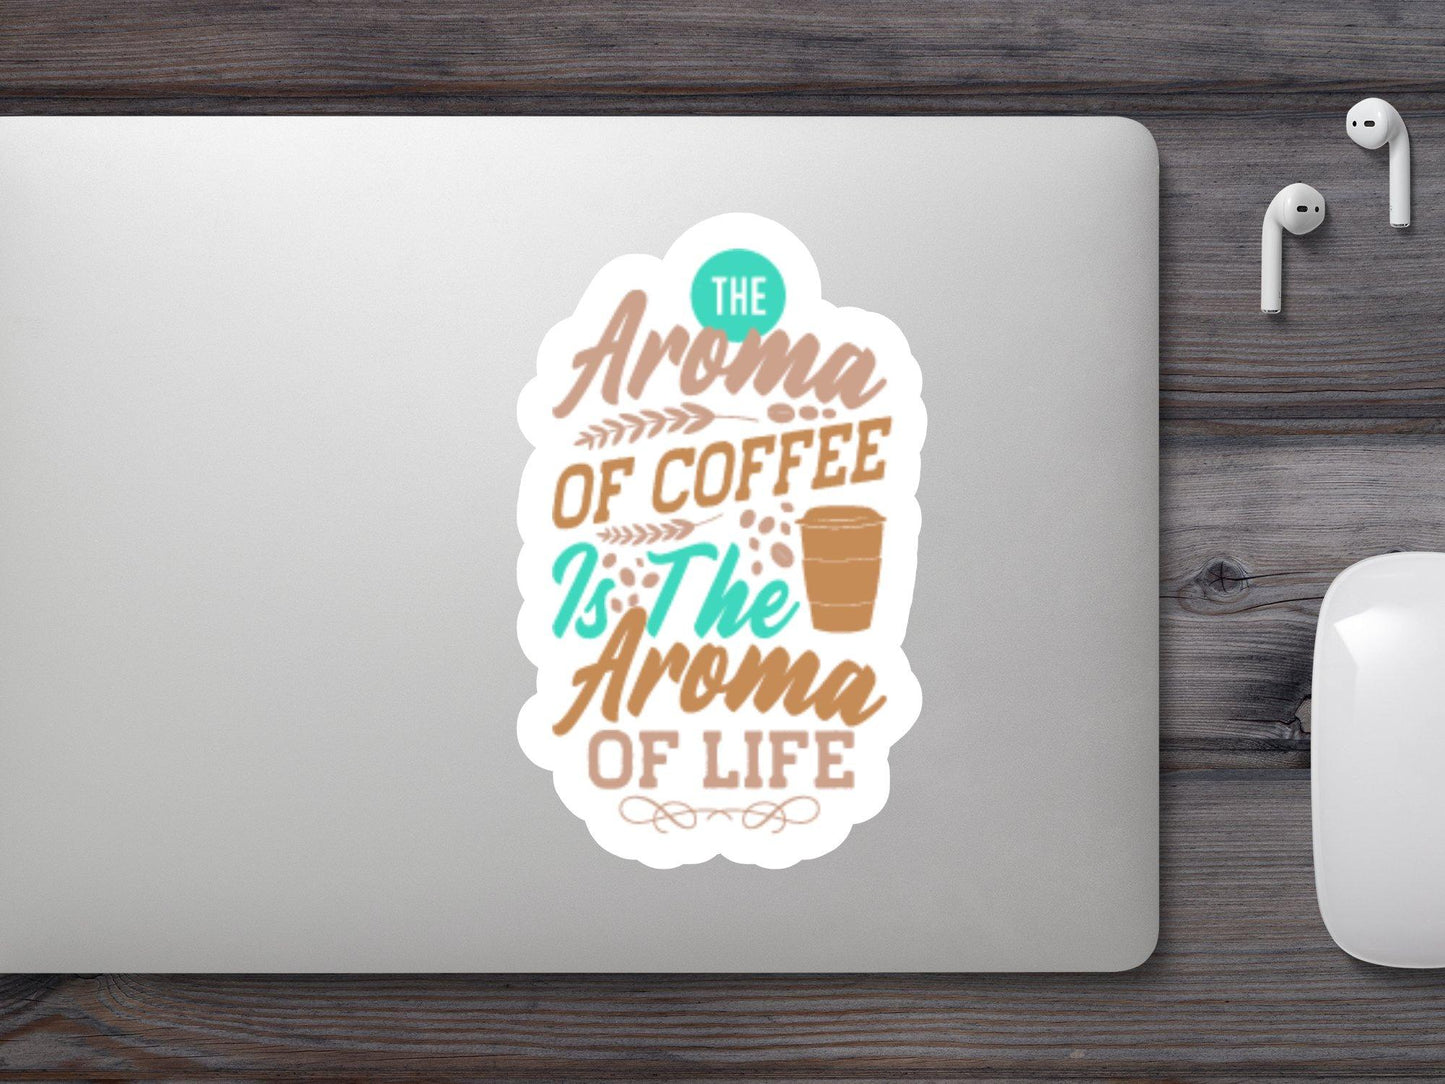 Being One With The Aroma of Coffee Is Good Sticker